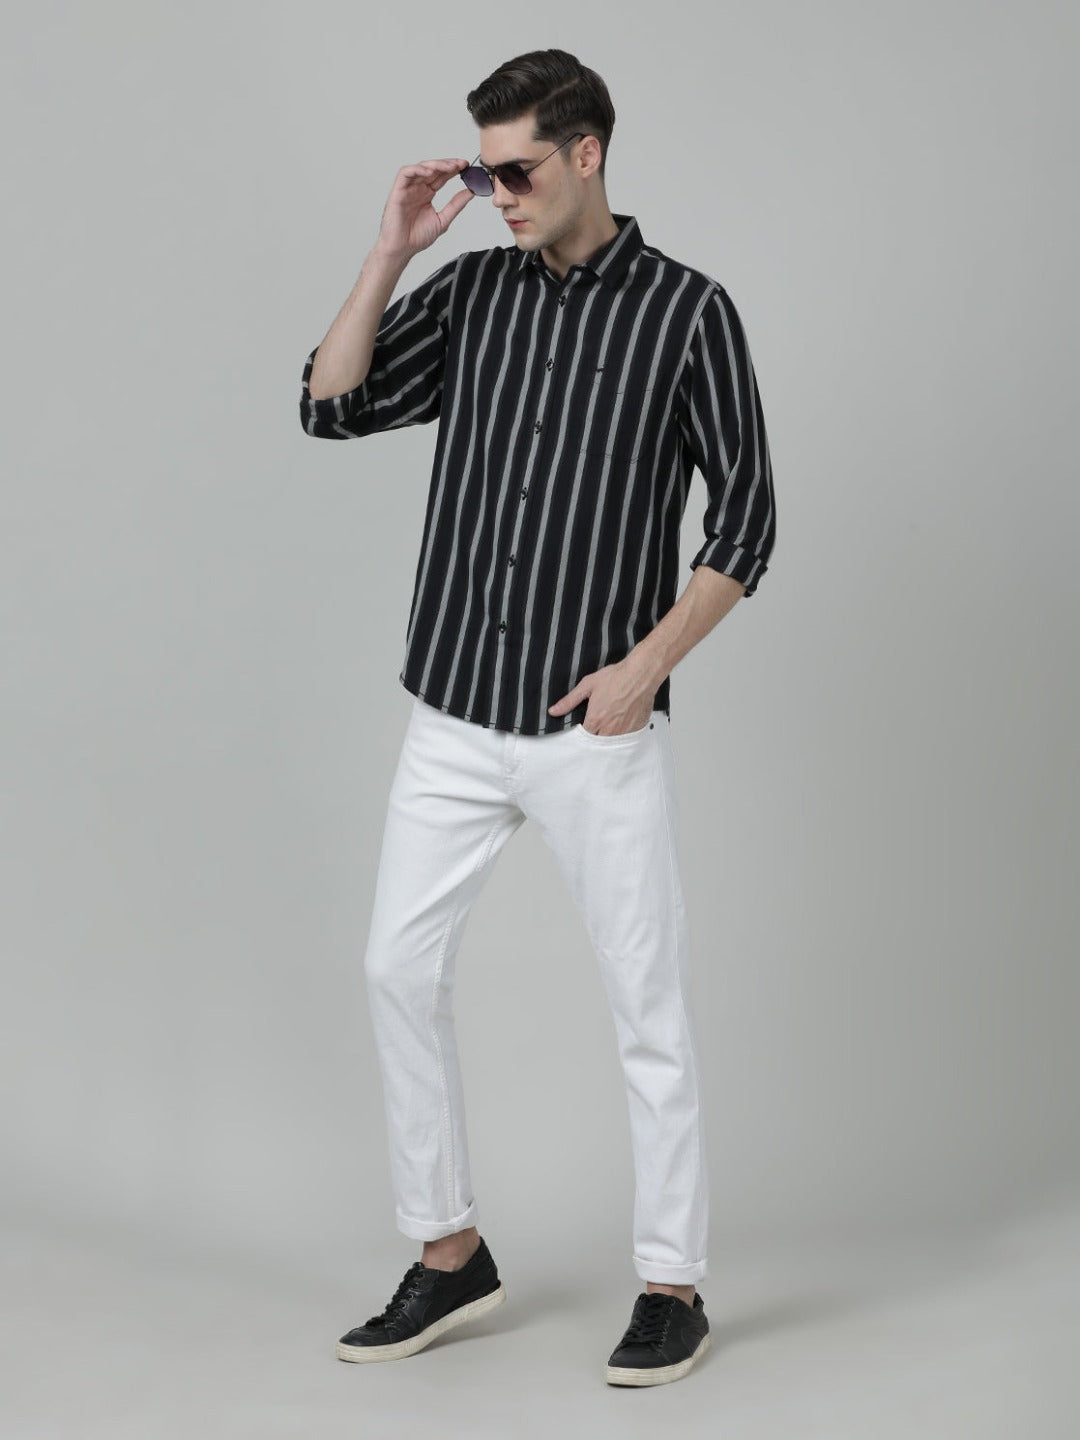 Casual Stripe Comfort Fit Black Full Sleeve Shirt with Collar